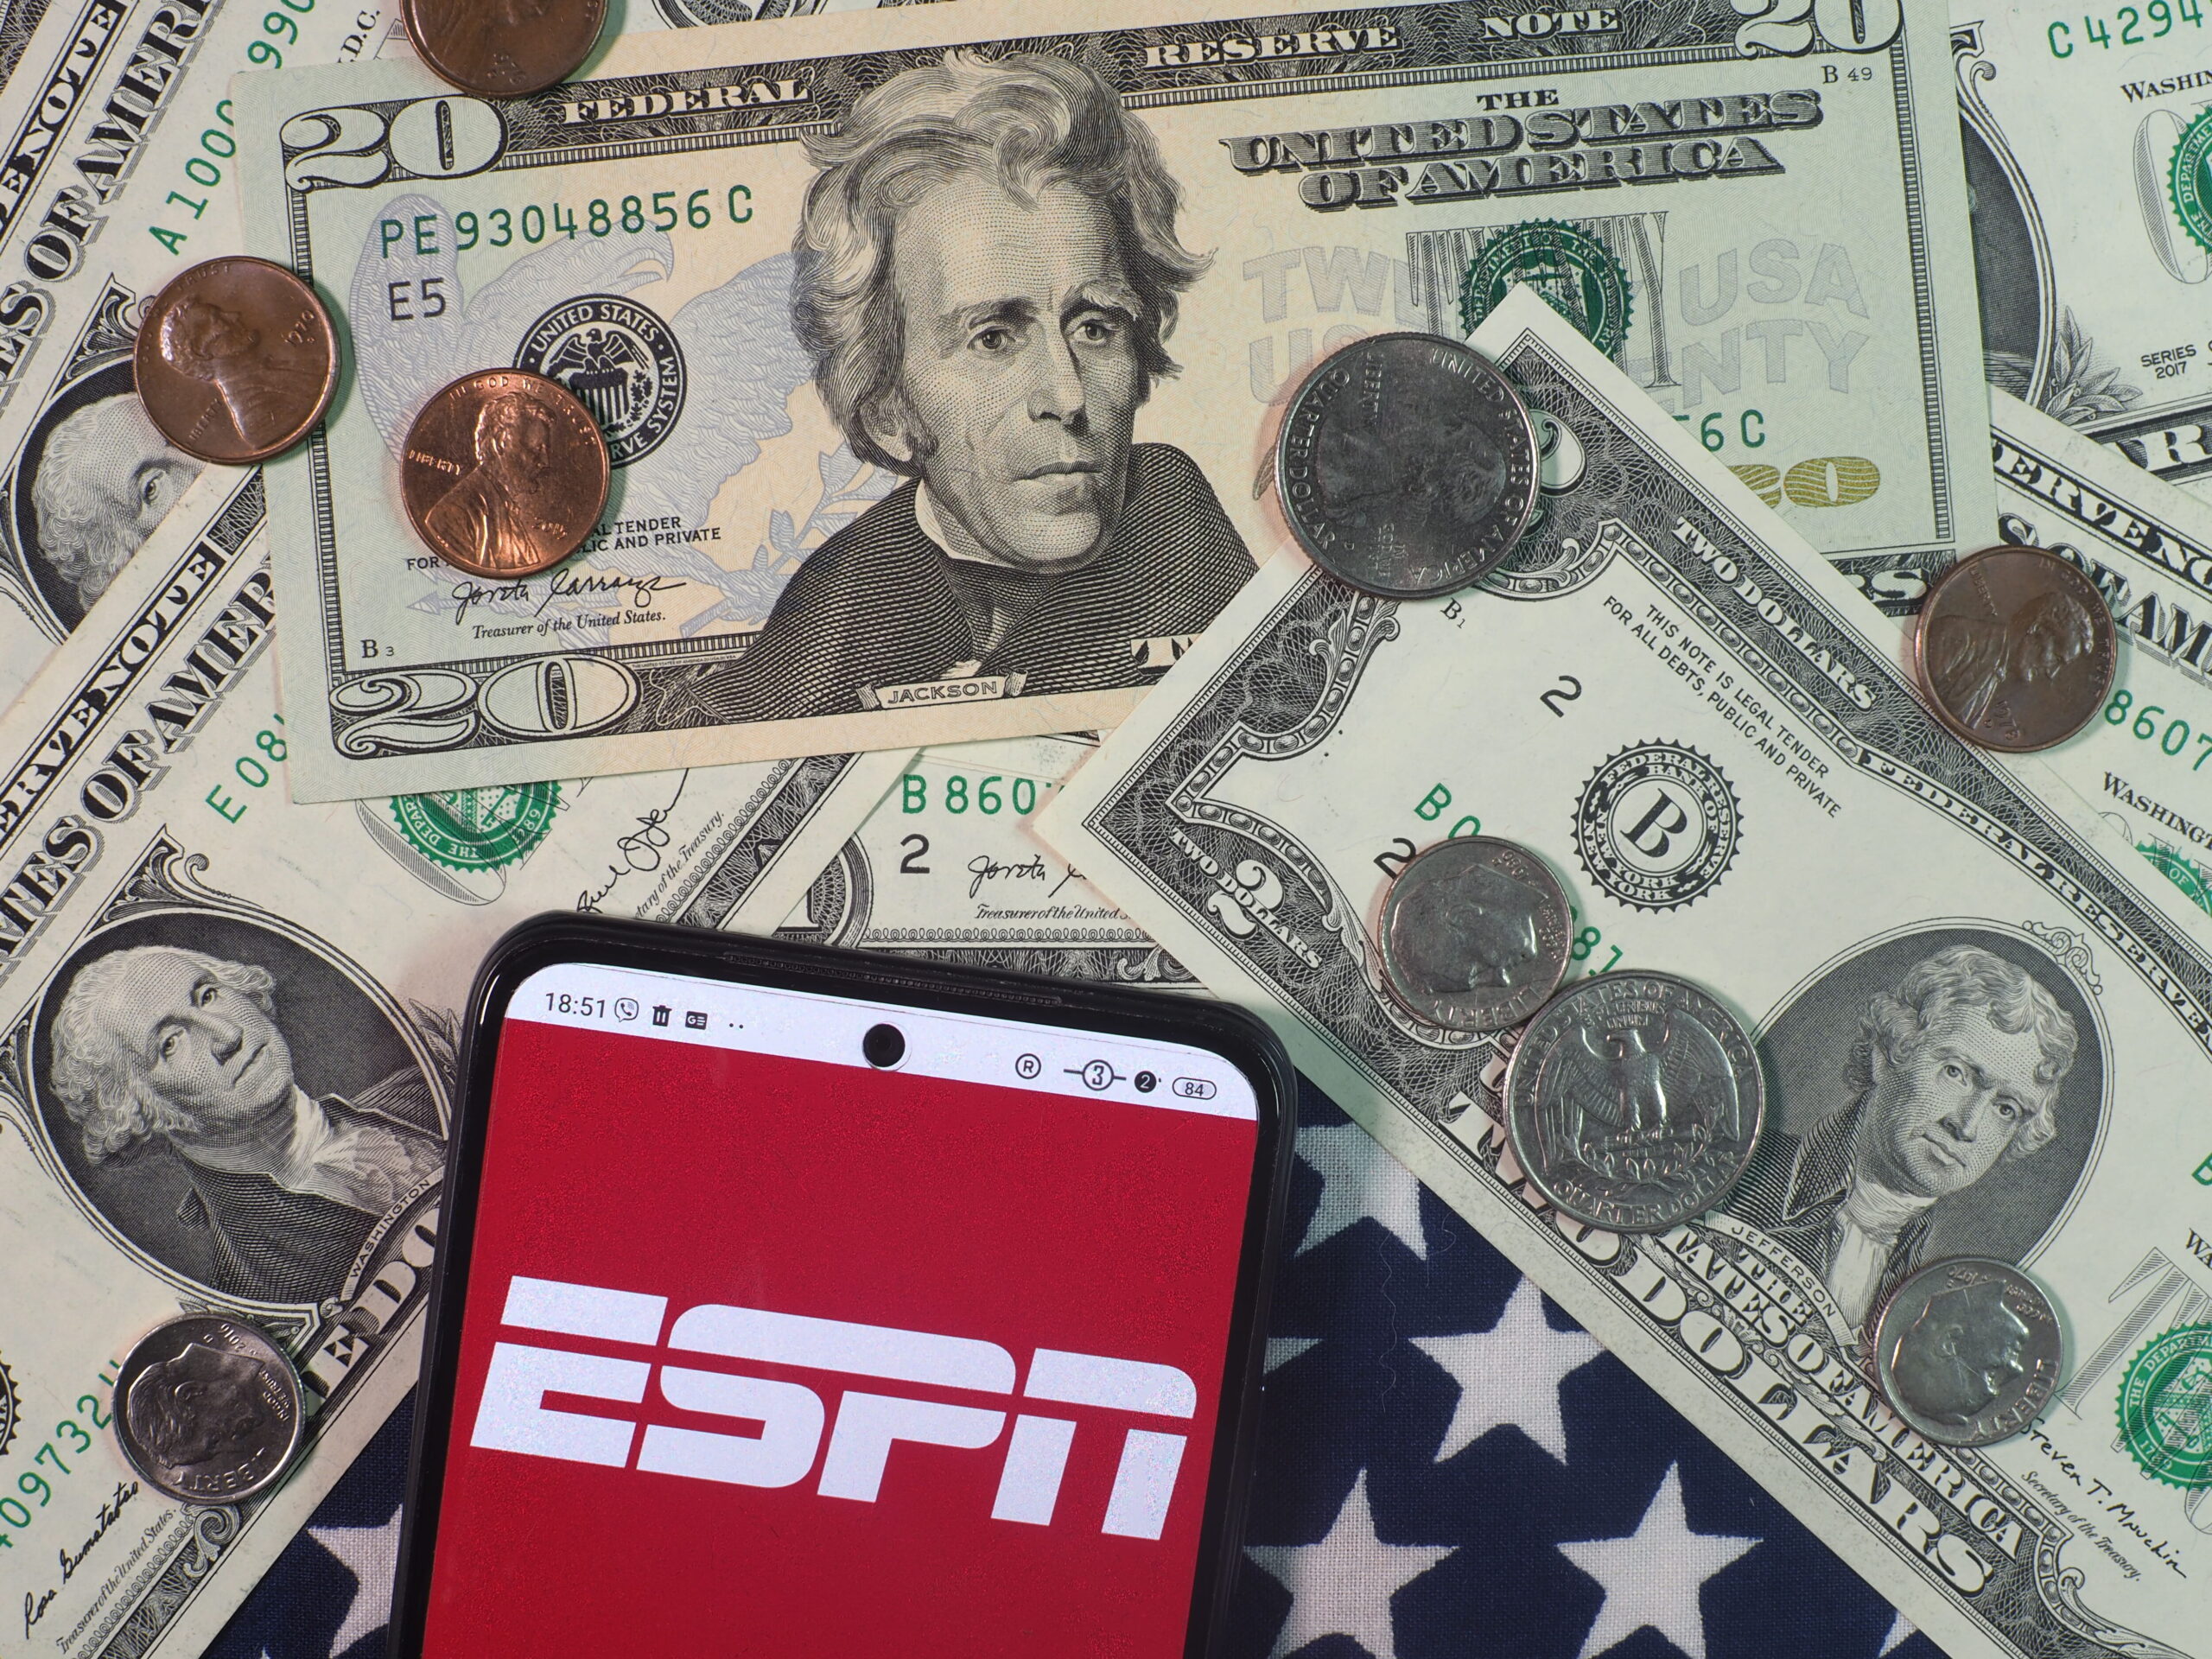 Poll: Prospective ESPN BET Users Look For Big Promos In Order to Make Switch Image